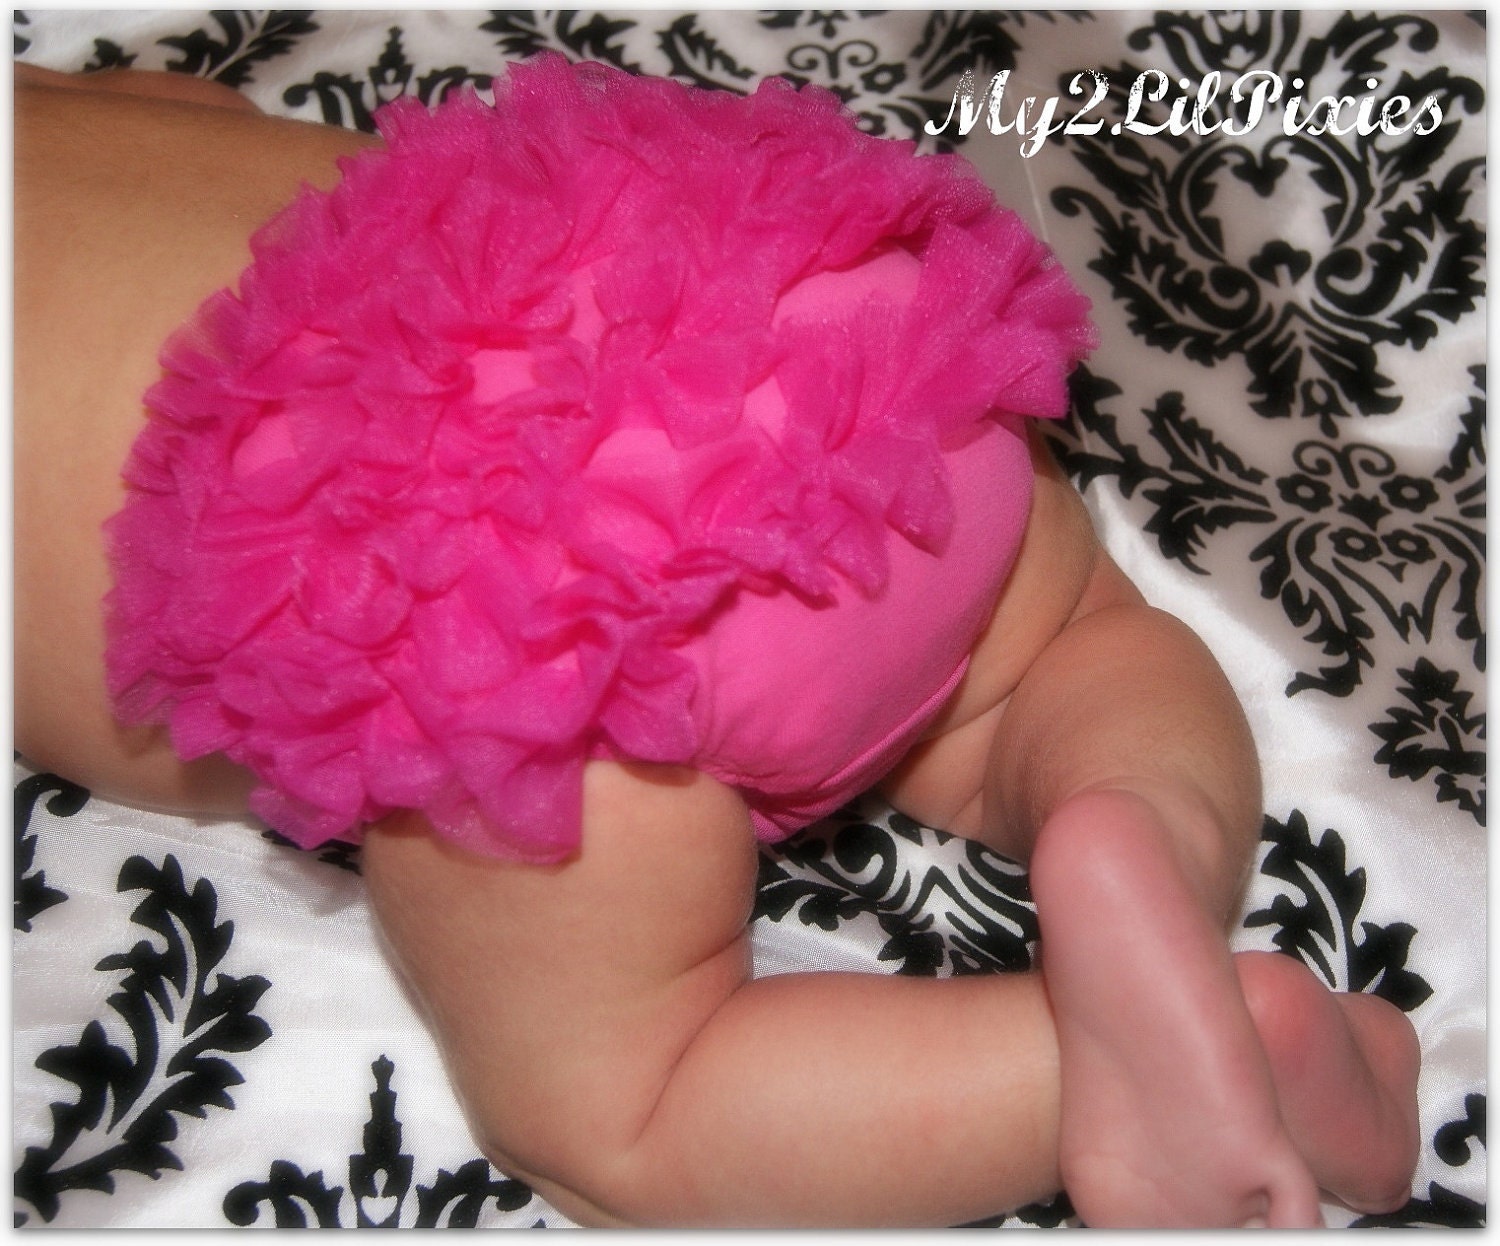 FREE shipping- Chiffon Ruffle Bum Bloomers - Perfect  Photo Prop - Fits Newborn and Toddler-  Colors Hot Pink Pink Black White Lavender Turquoise Red - Treasury Featured Item